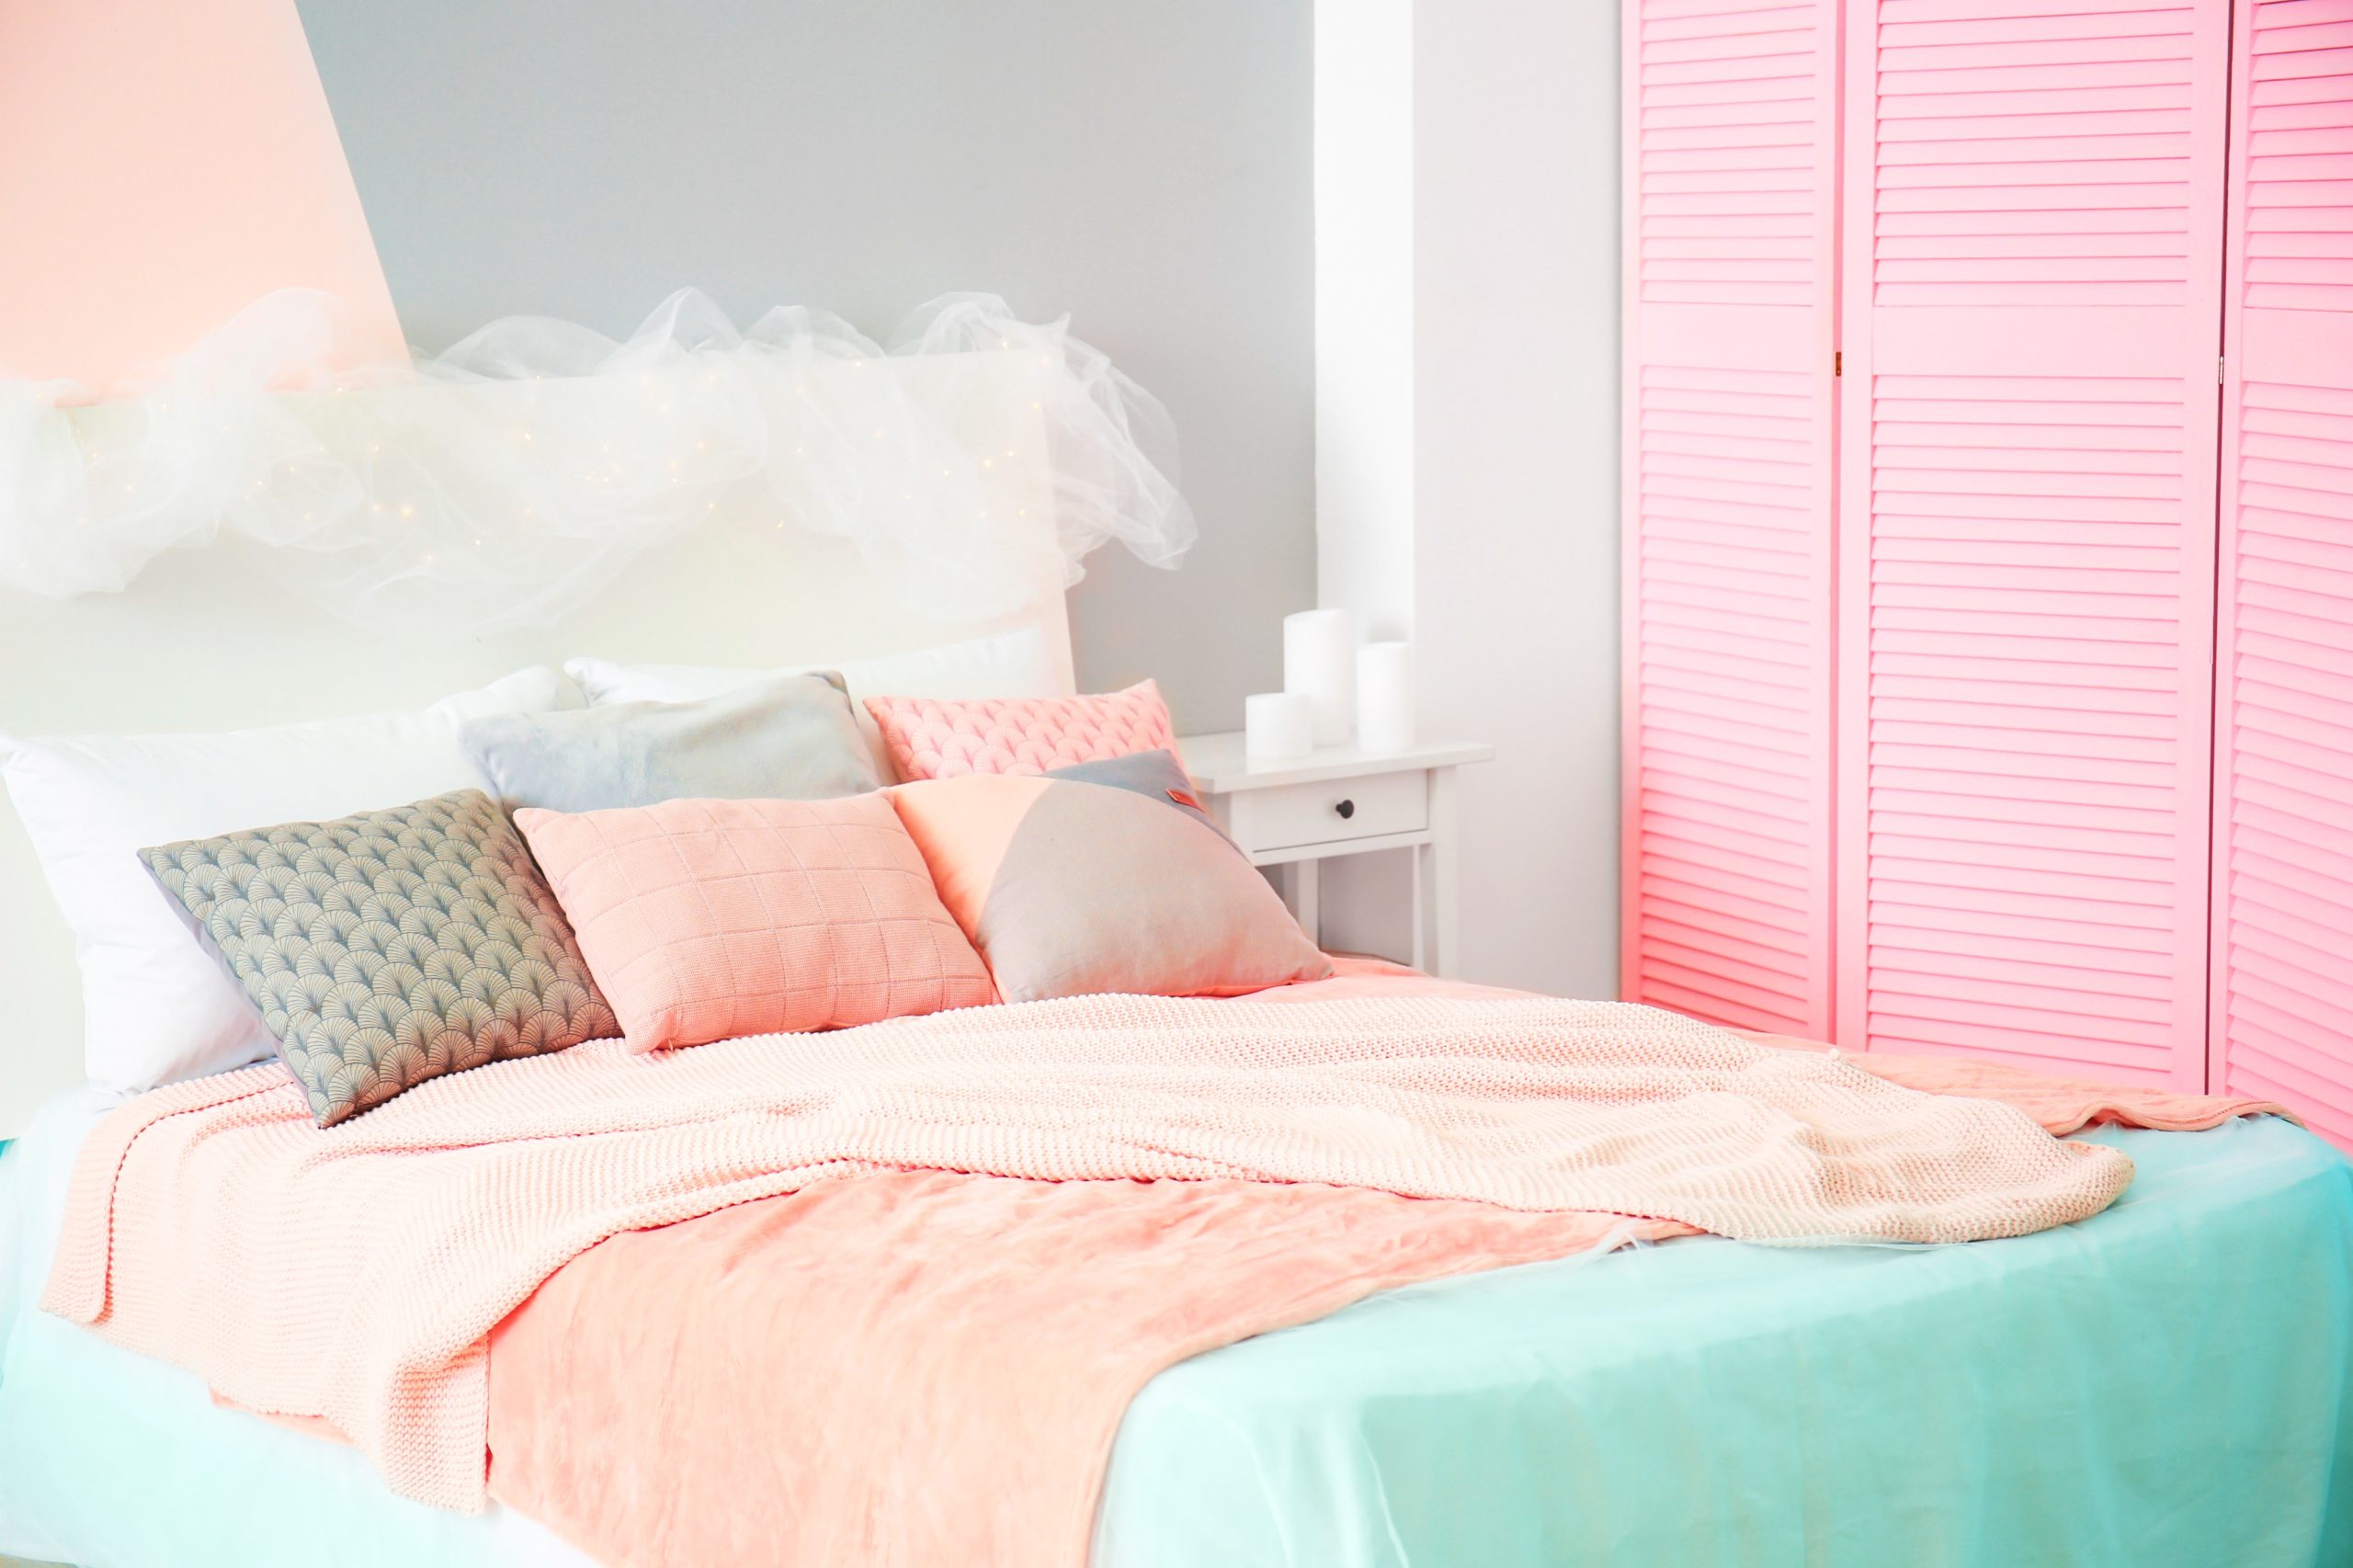 <img src="pastel.jpg" alt="pastel pink and blue cute bed"/> 